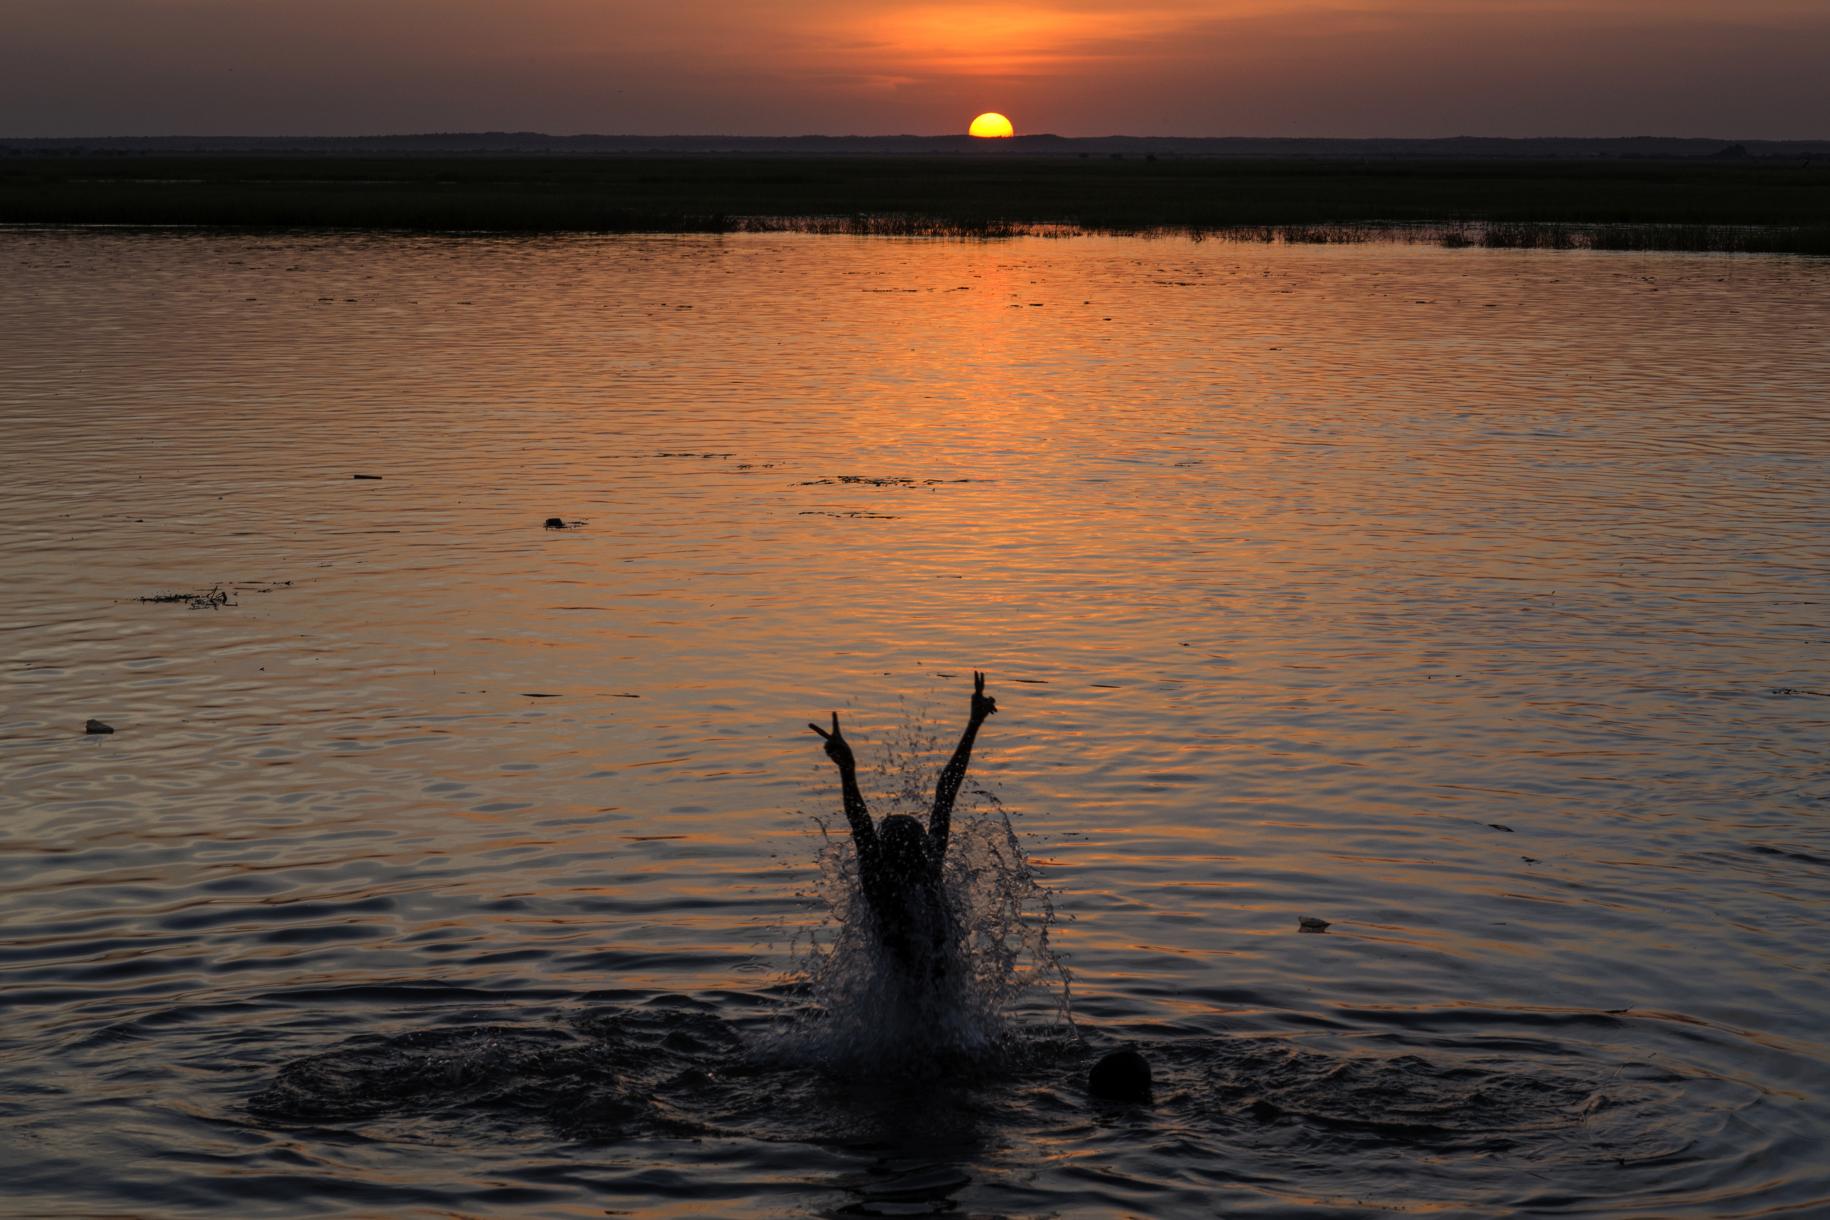 Women jumps out from the water with her arms raised high,as the sun sets.